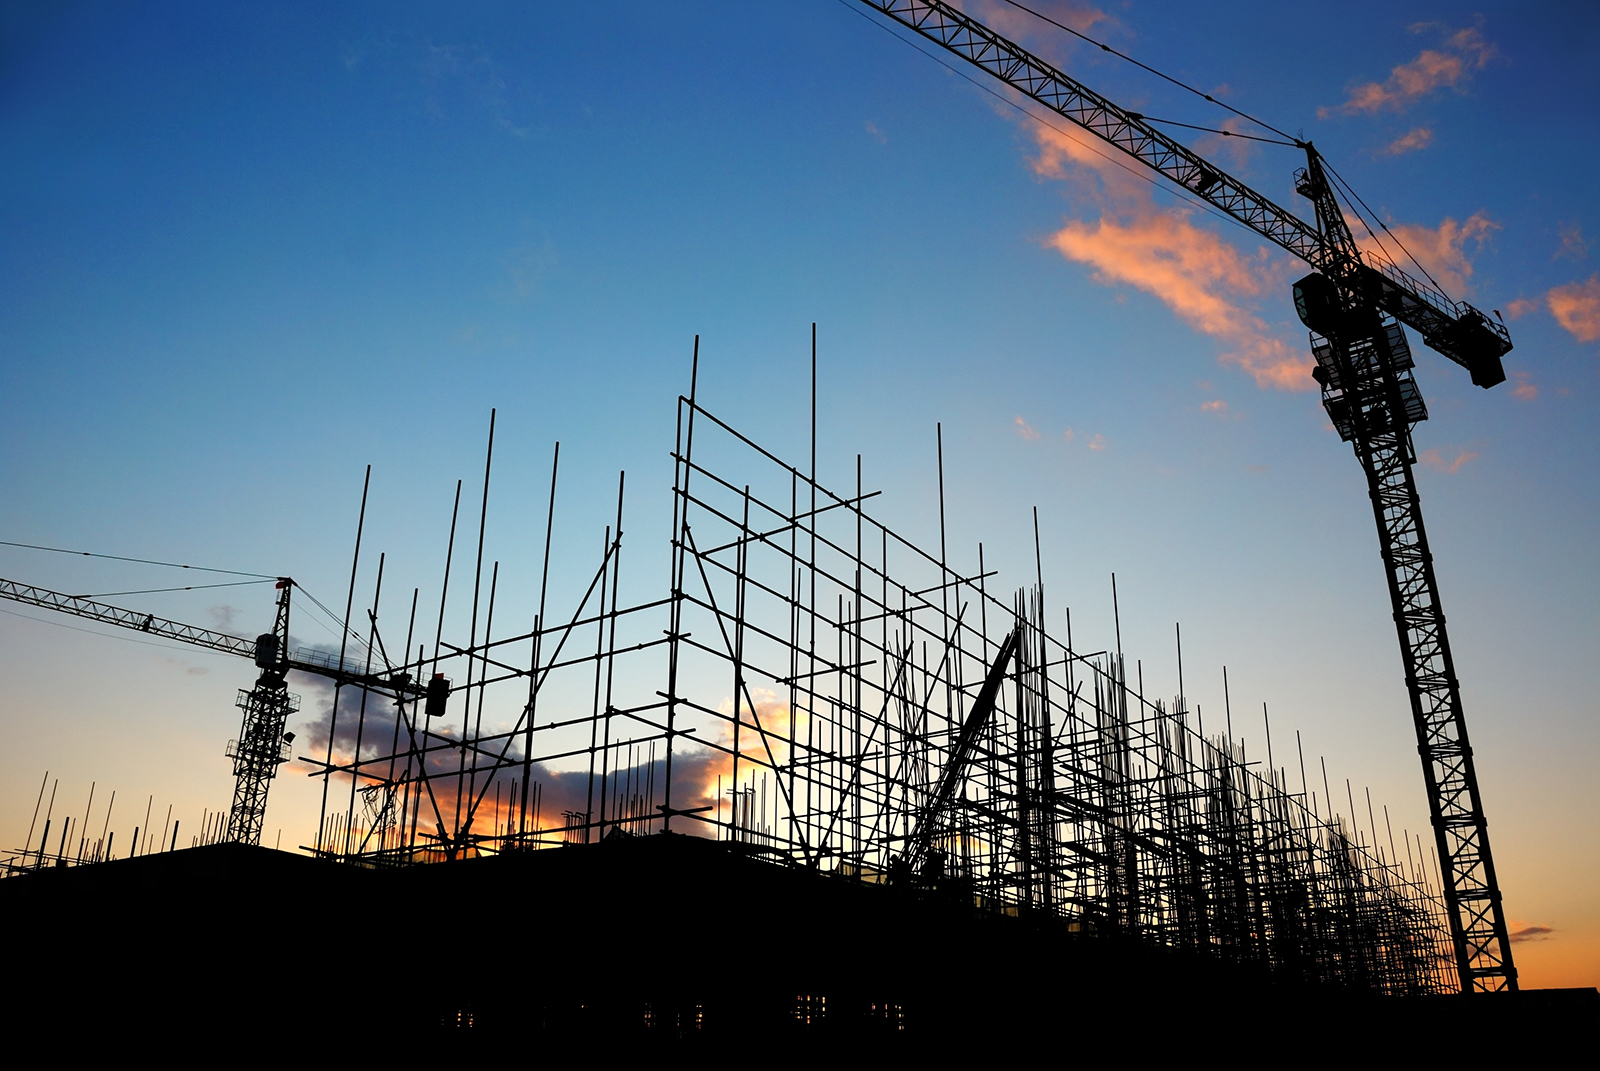 Total Construction Starts Inch Higher in April